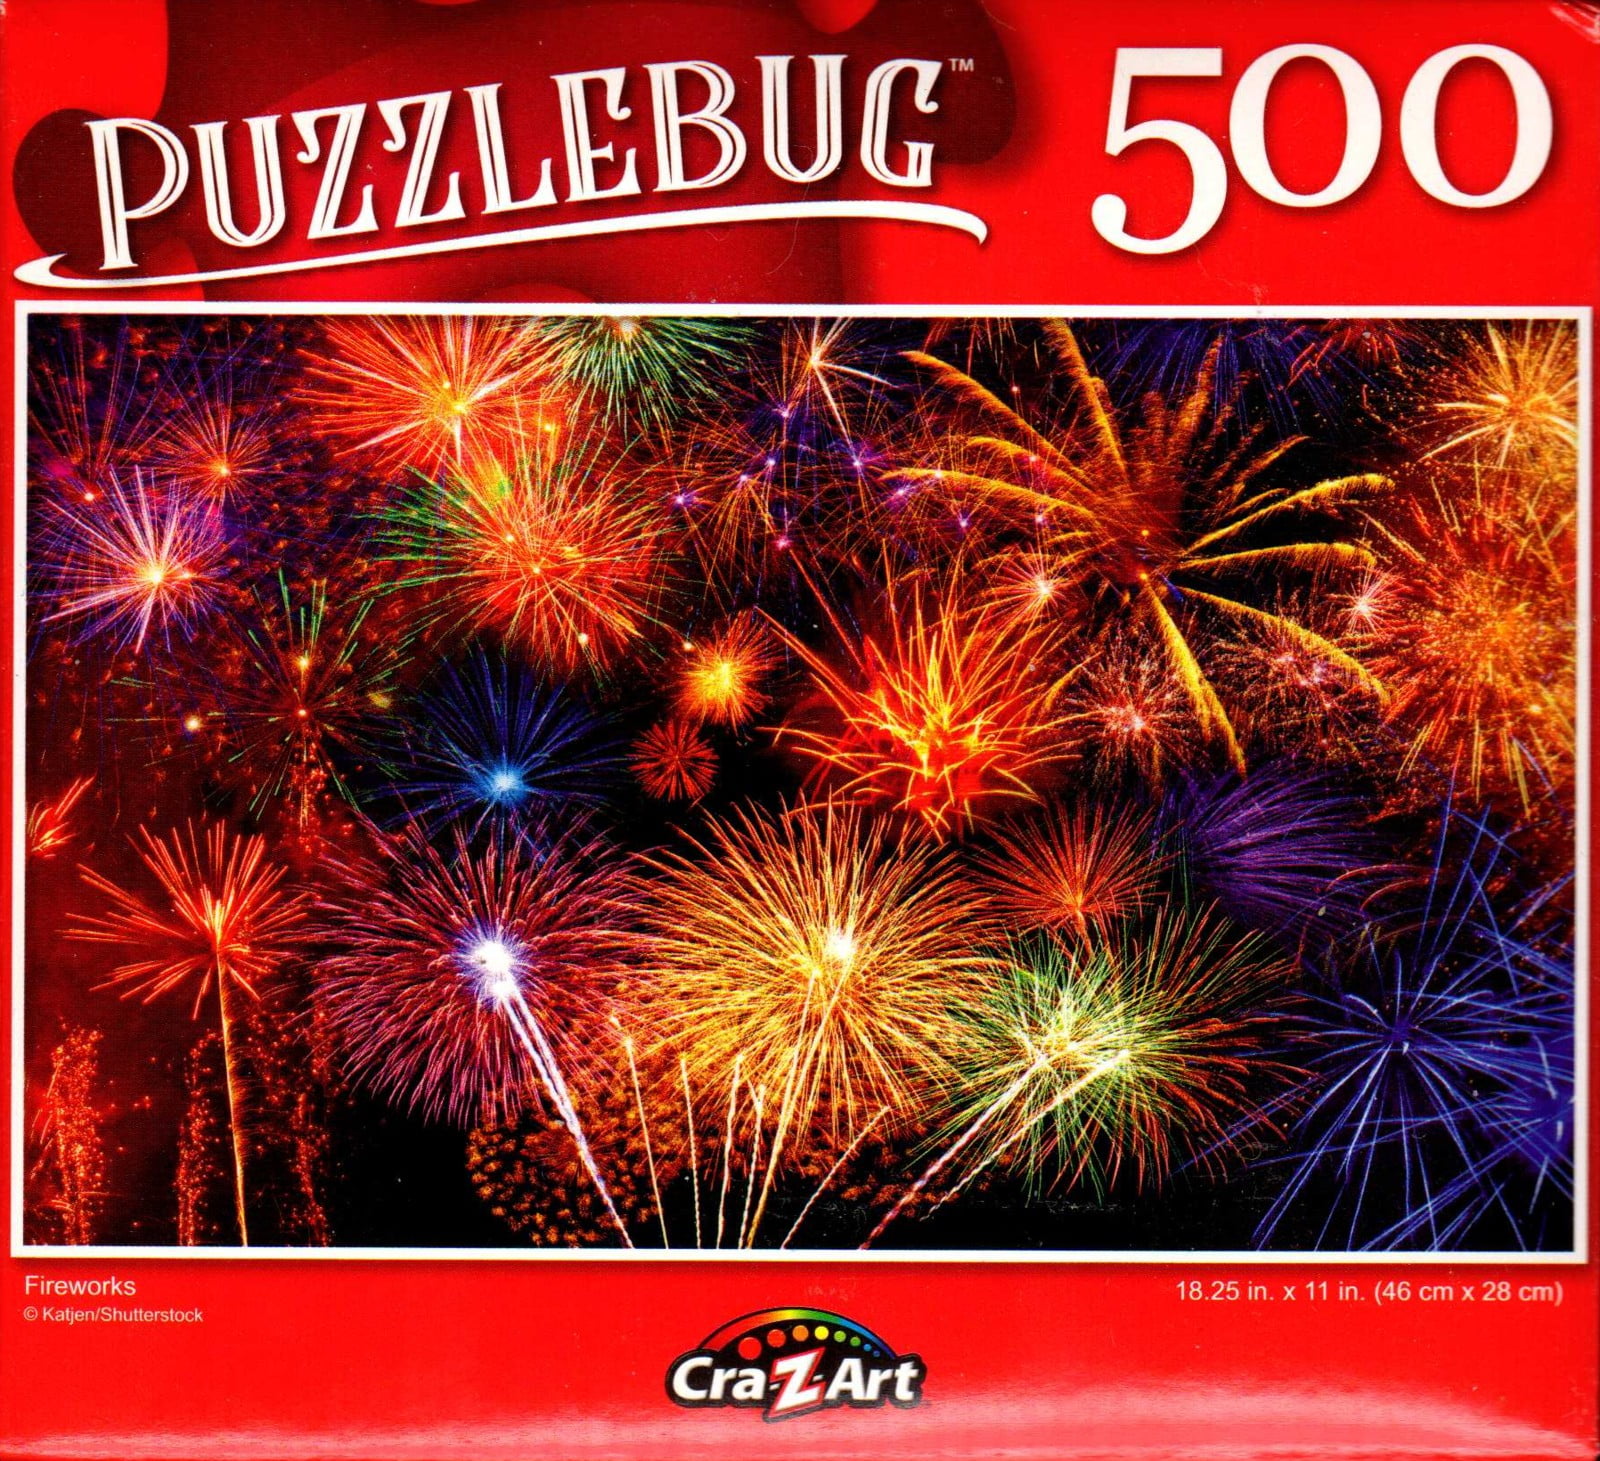 500 Piece Jigsaw Puzzle Puzzlebug 18 in x 11 in Sweet Treats On Display 